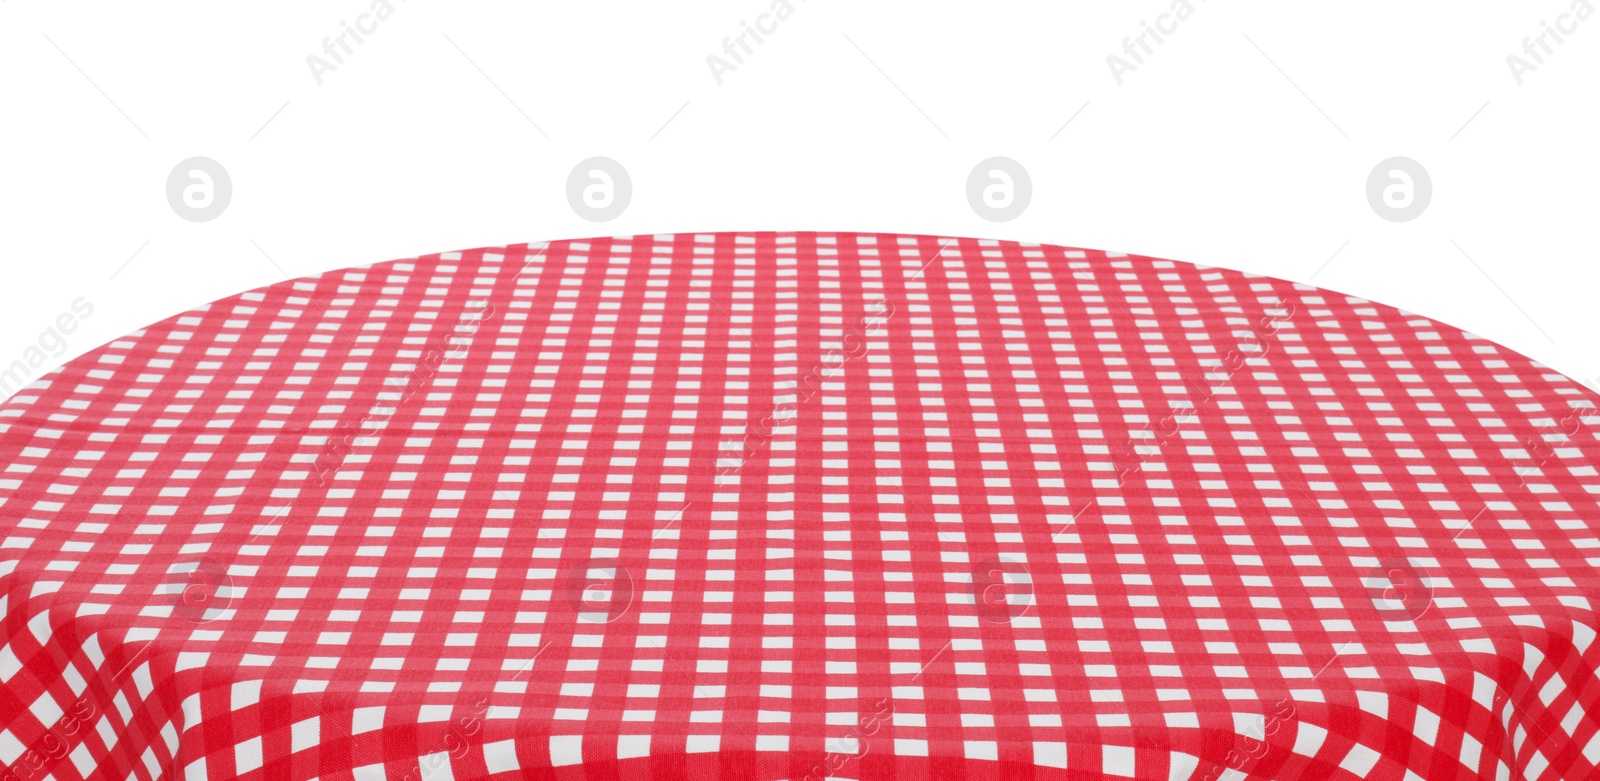 Photo of Table with checkered tablecloth isolated on white